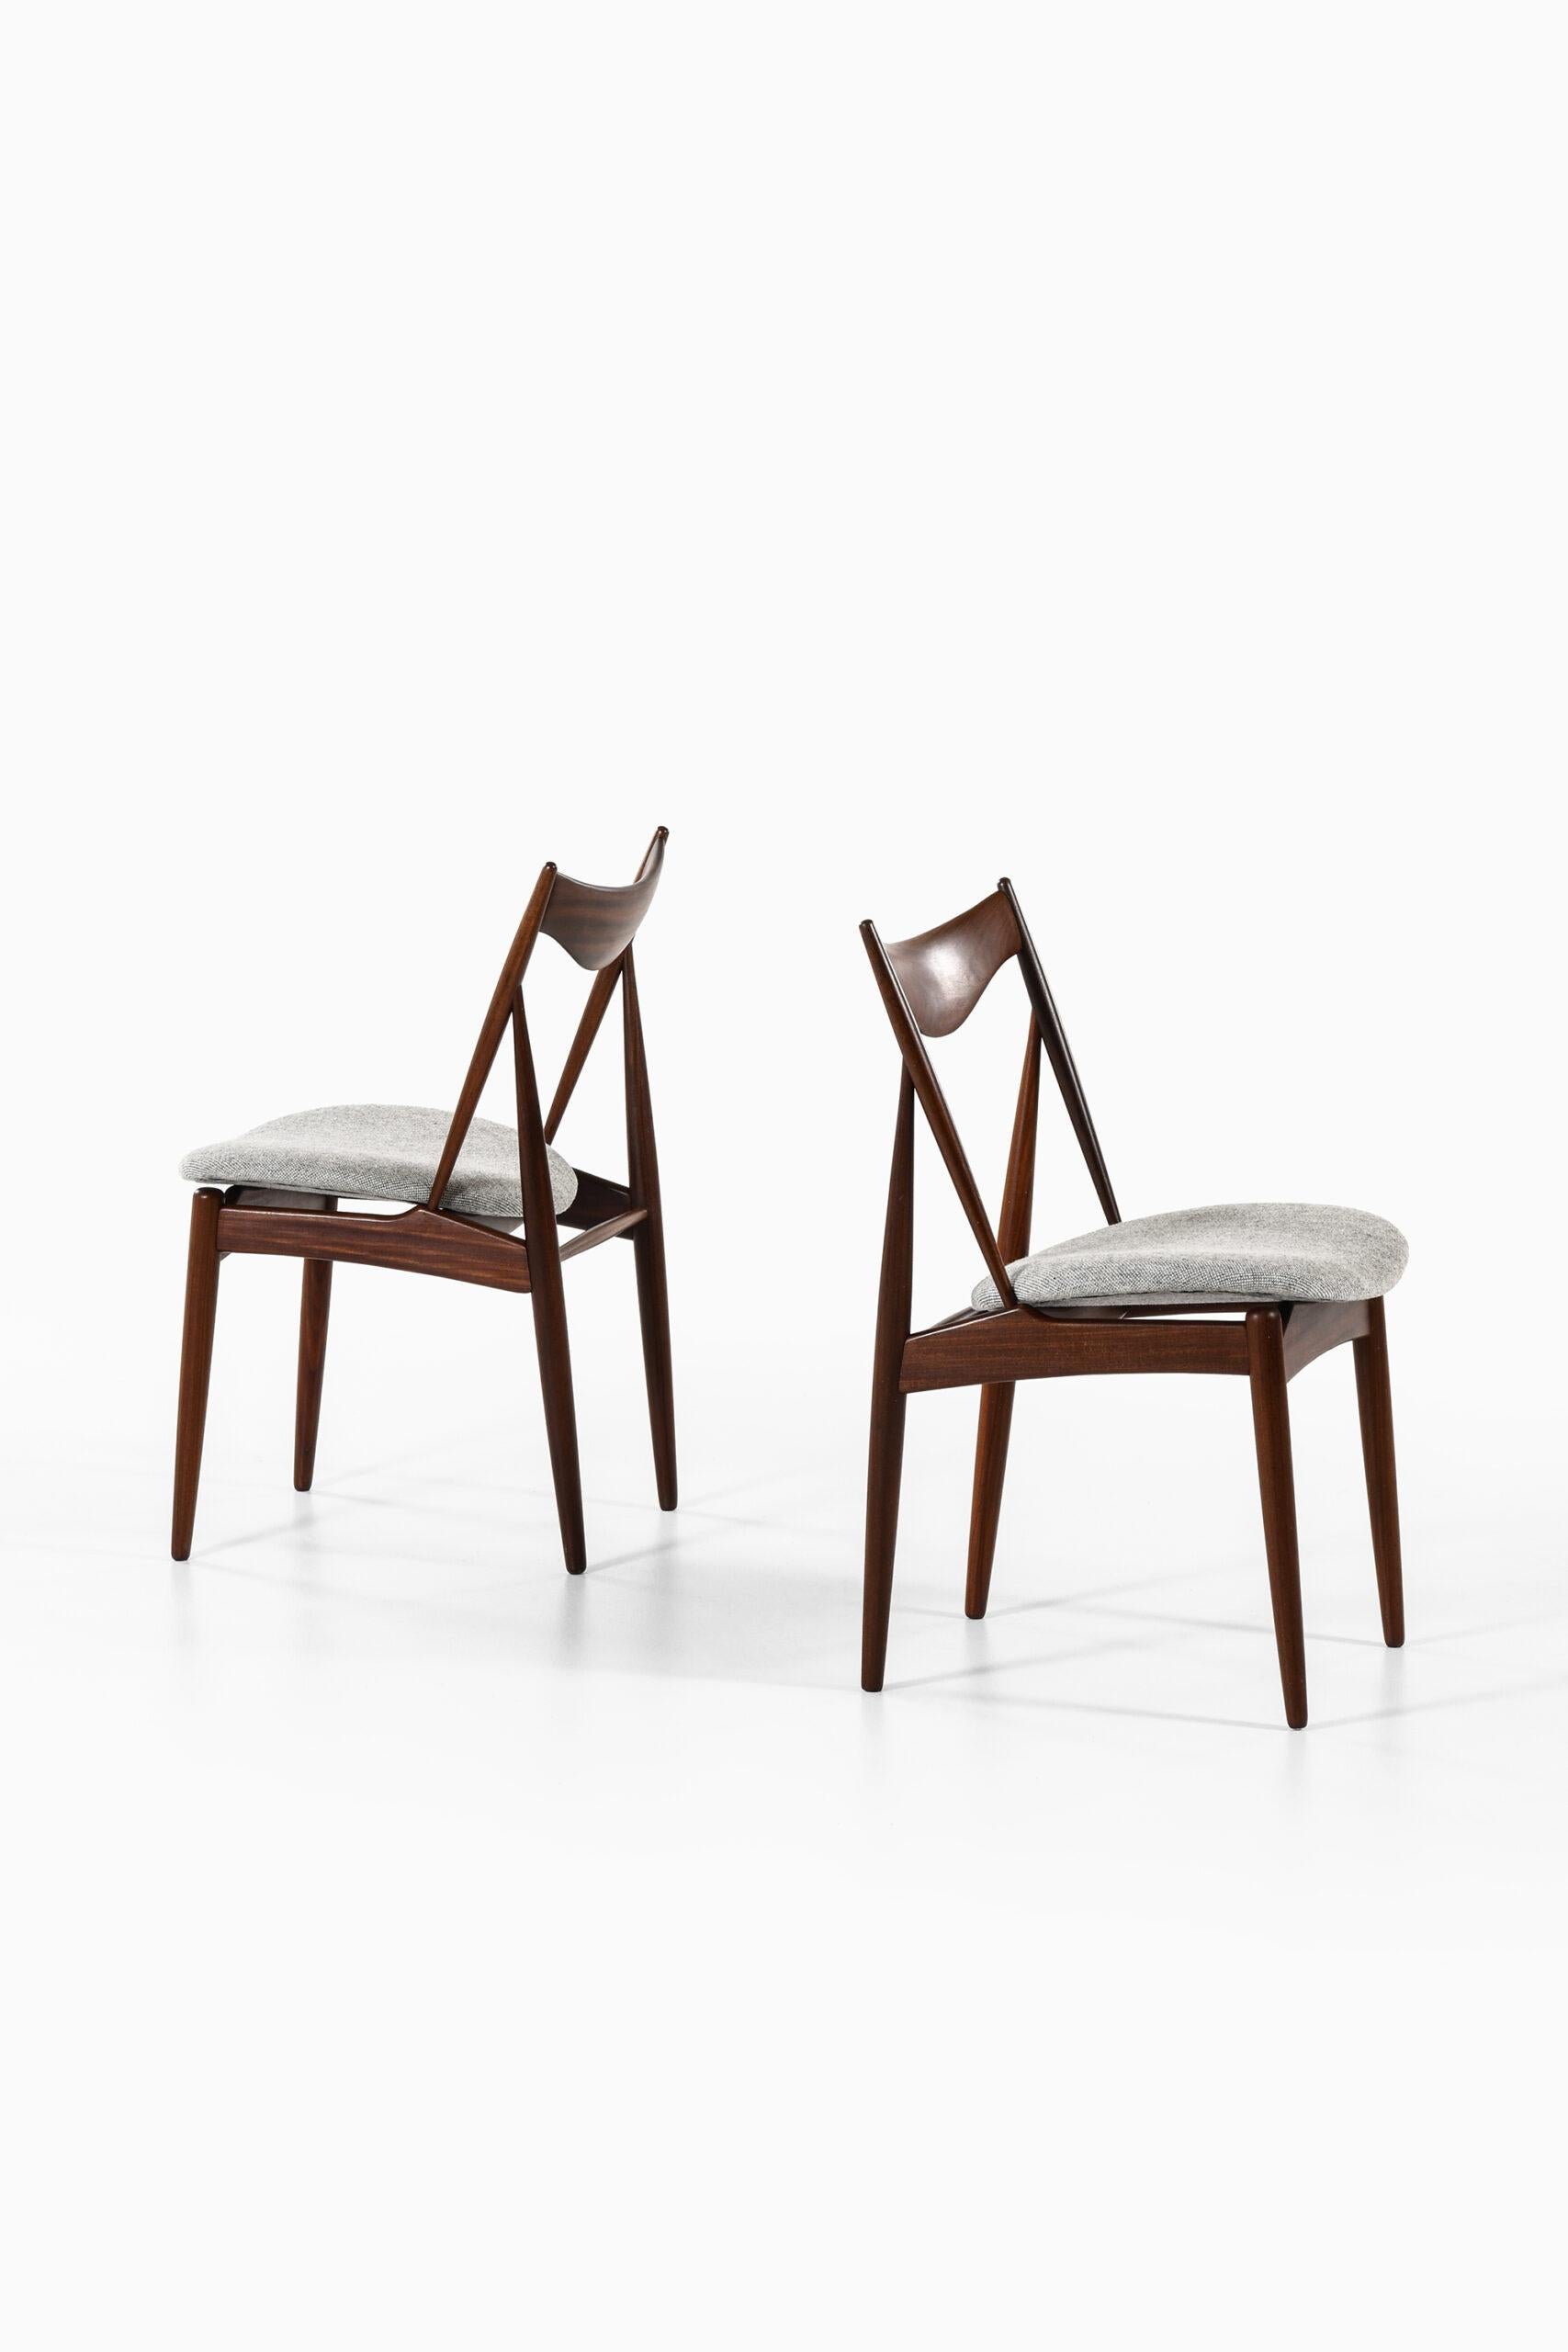 Very rare set of 10 dining chairs designed by Kurt Østervig. Produced by Bramin in Denmark.